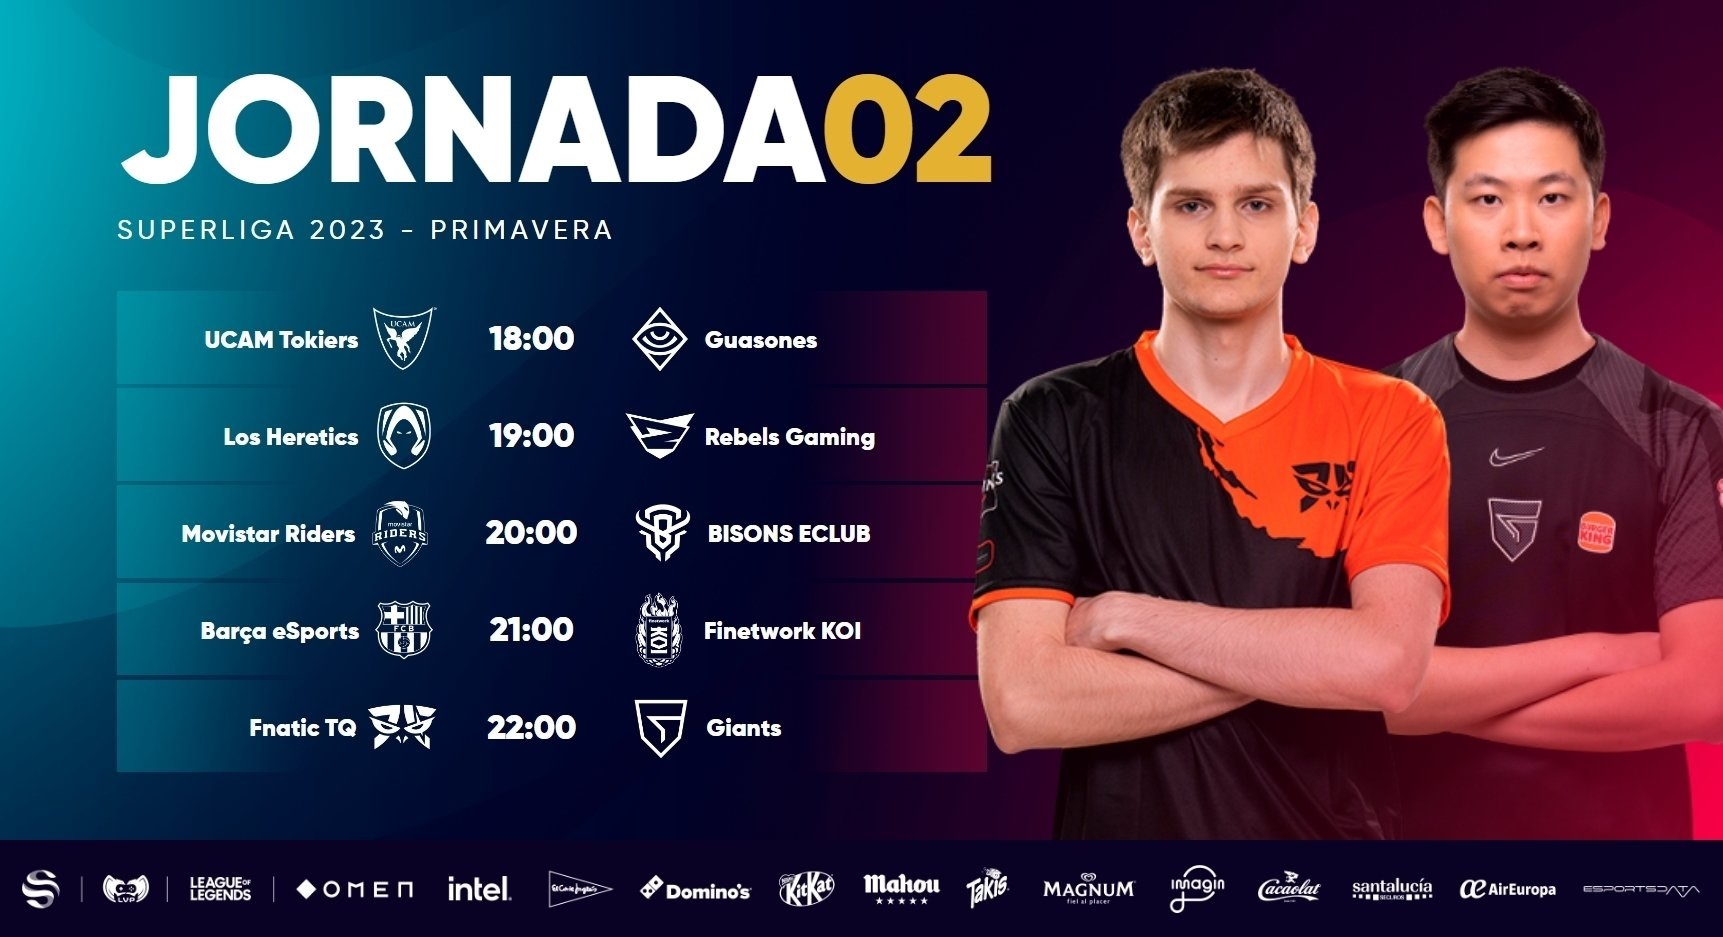 Superliga, schedules of the first day.  @LVPesLoL